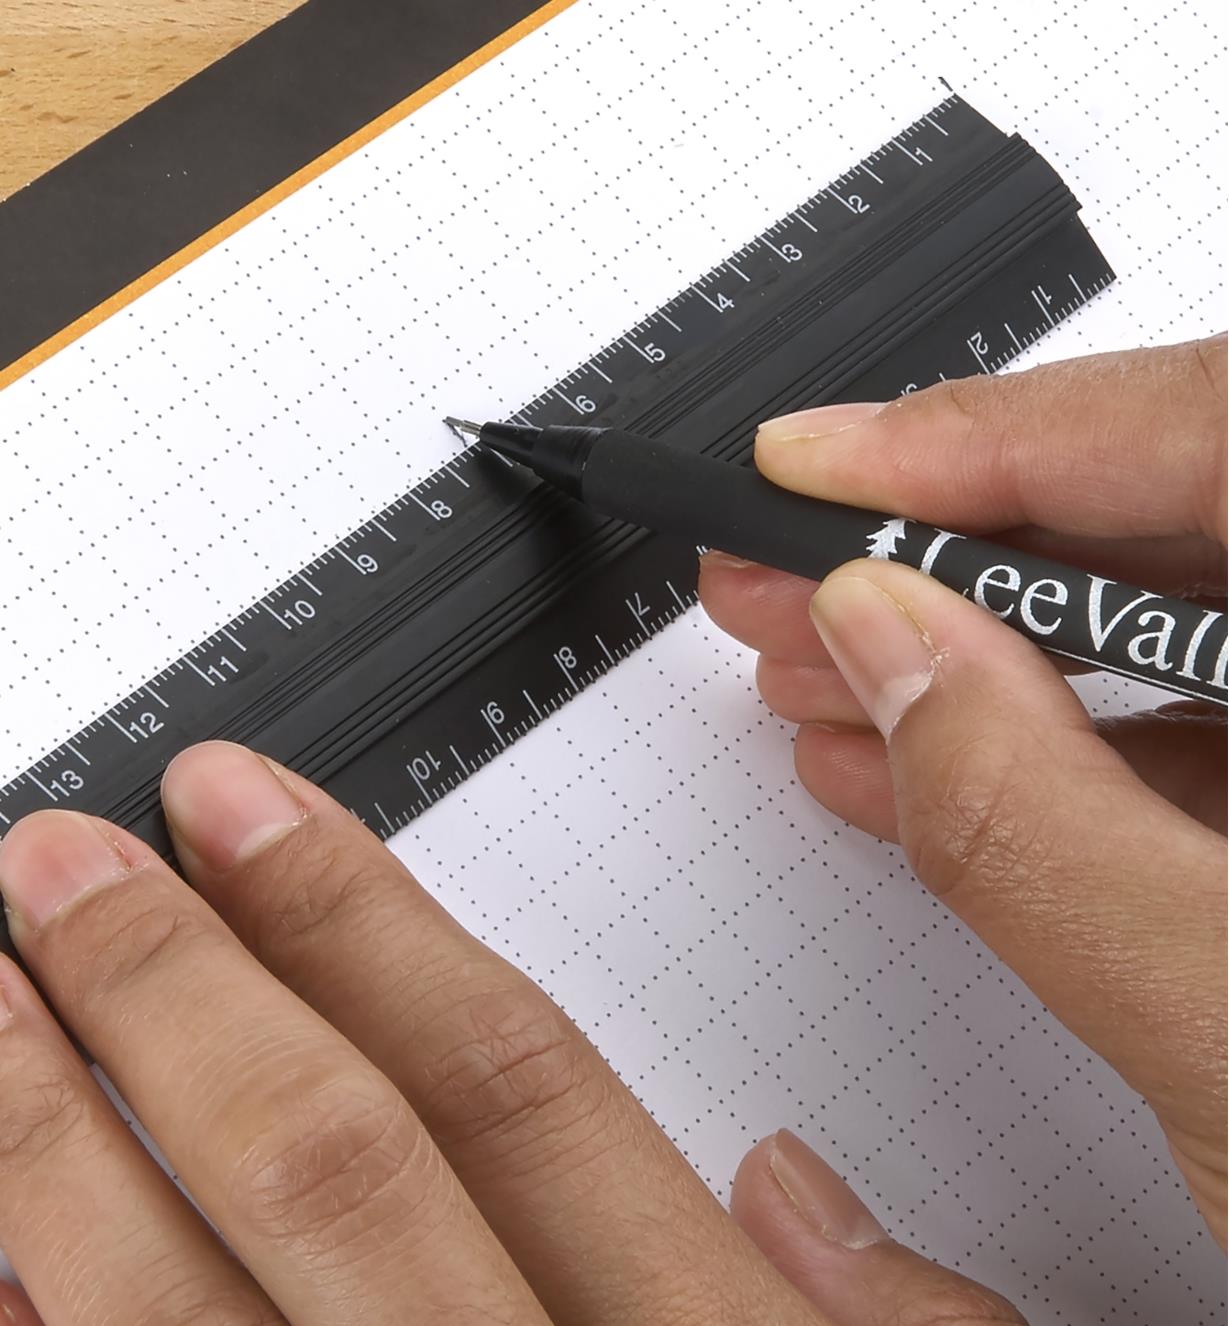 Using a pencil and a Veritas bench rule to render a scale drawing on a Veritas scratch pad